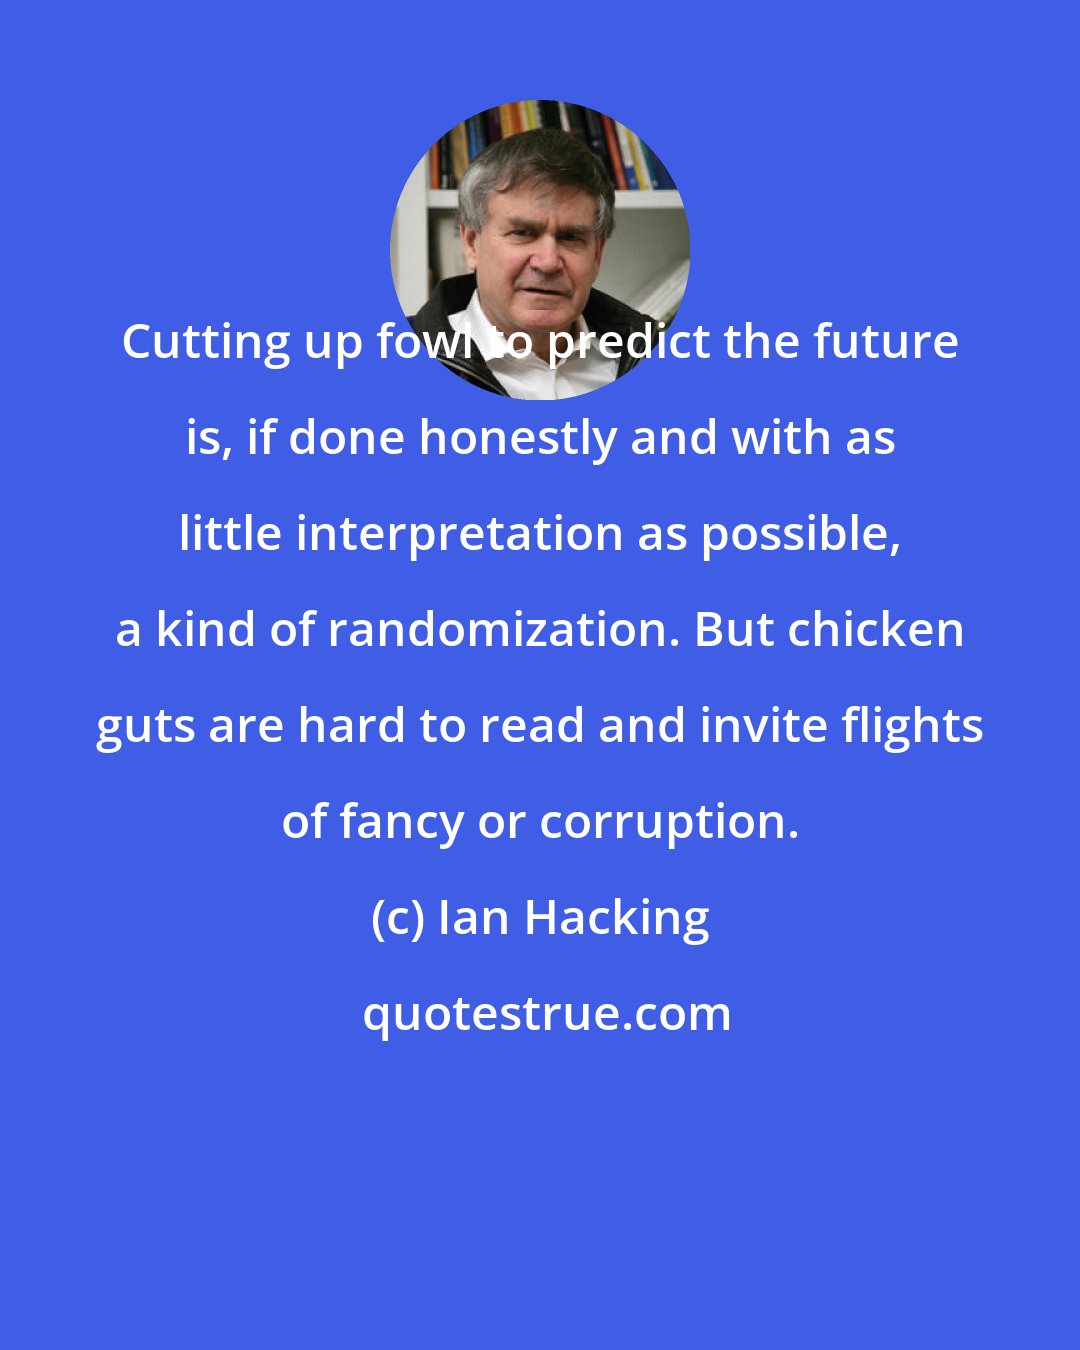 Ian Hacking: Cutting up fowl to predict the future is, if done honestly and with as little interpretation as possible, a kind of randomization. But chicken guts are hard to read and invite flights of fancy or corruption.